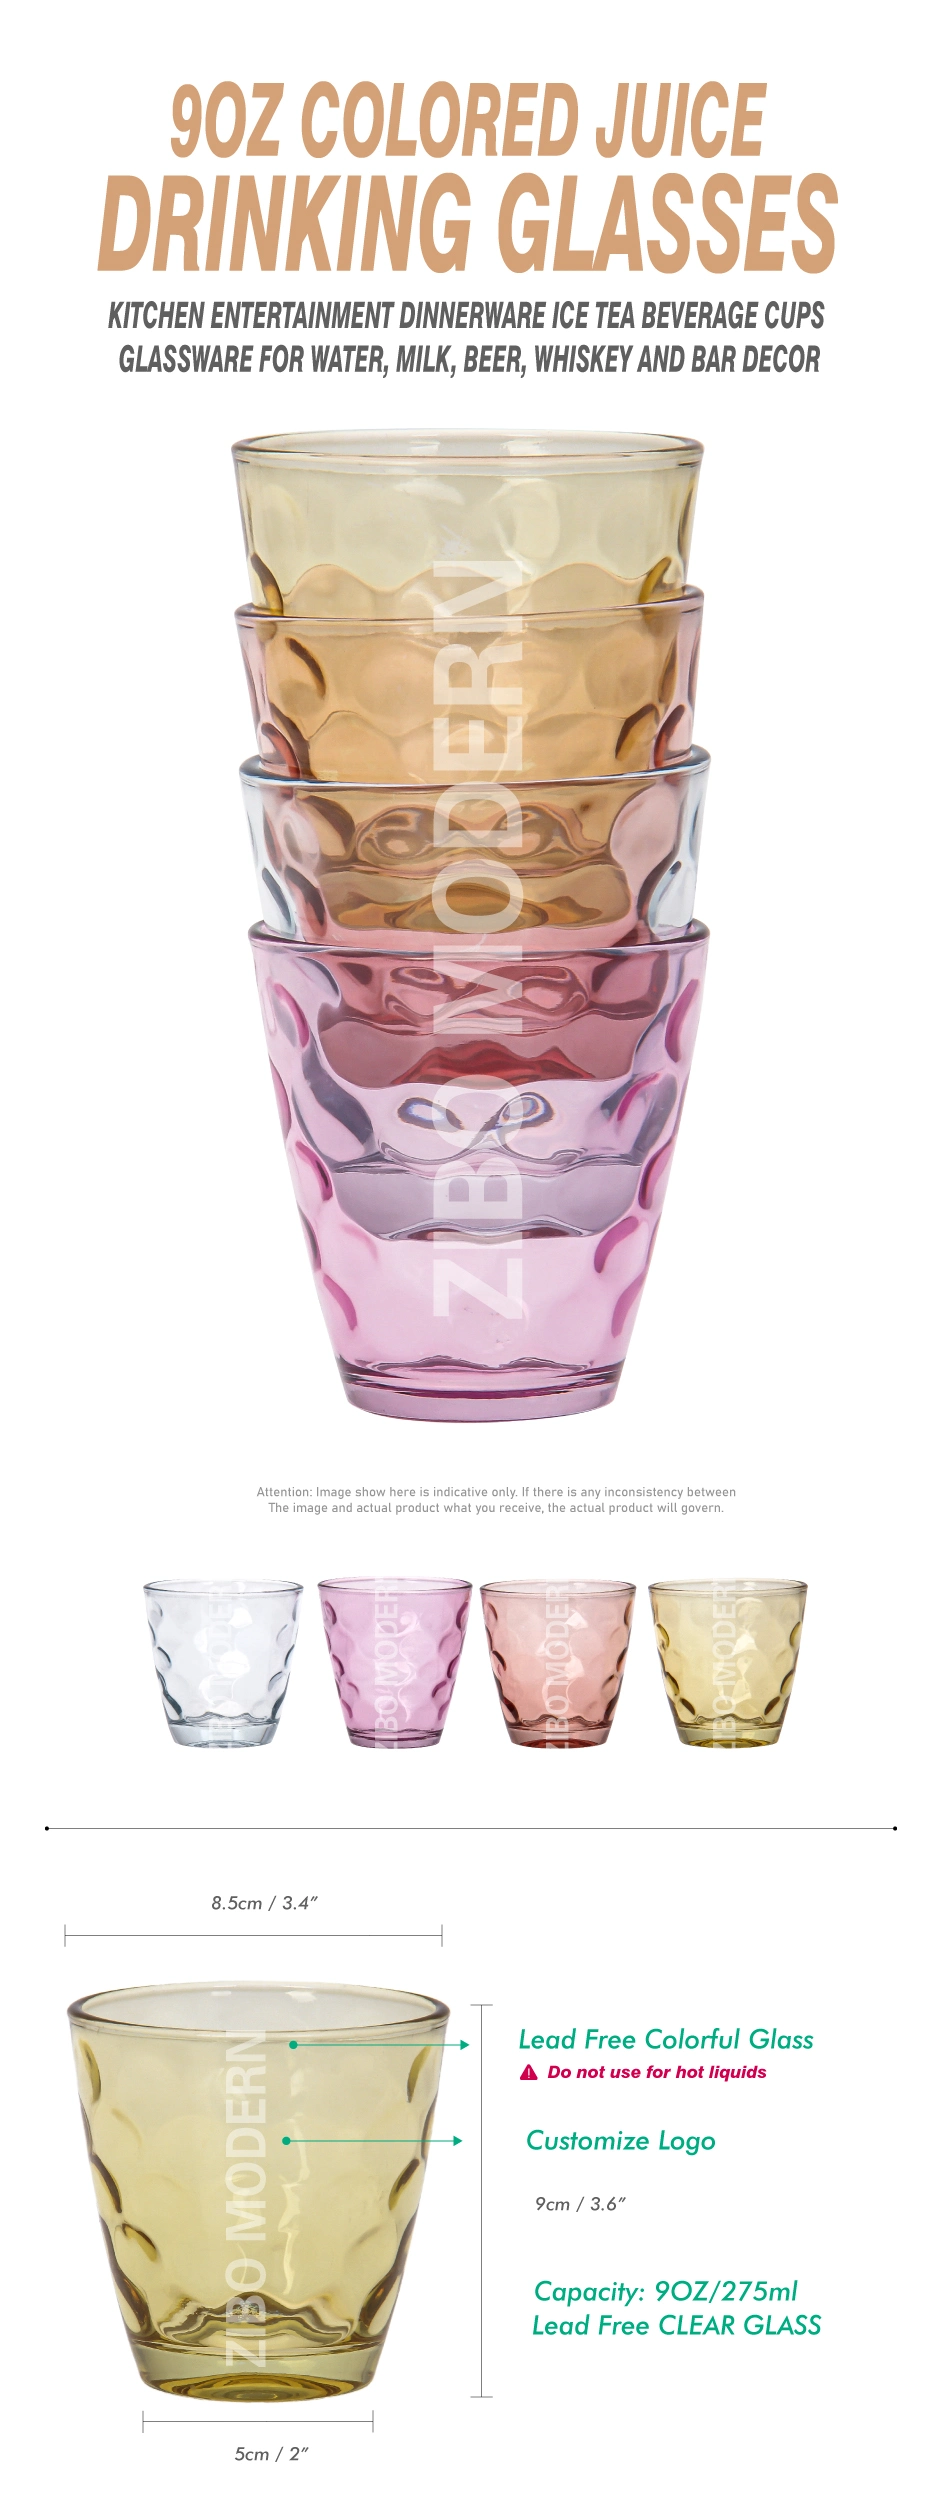 9 Oz Colored Juice Drinking Glasses Water Glasses Wine Glasses Glass Tumbler